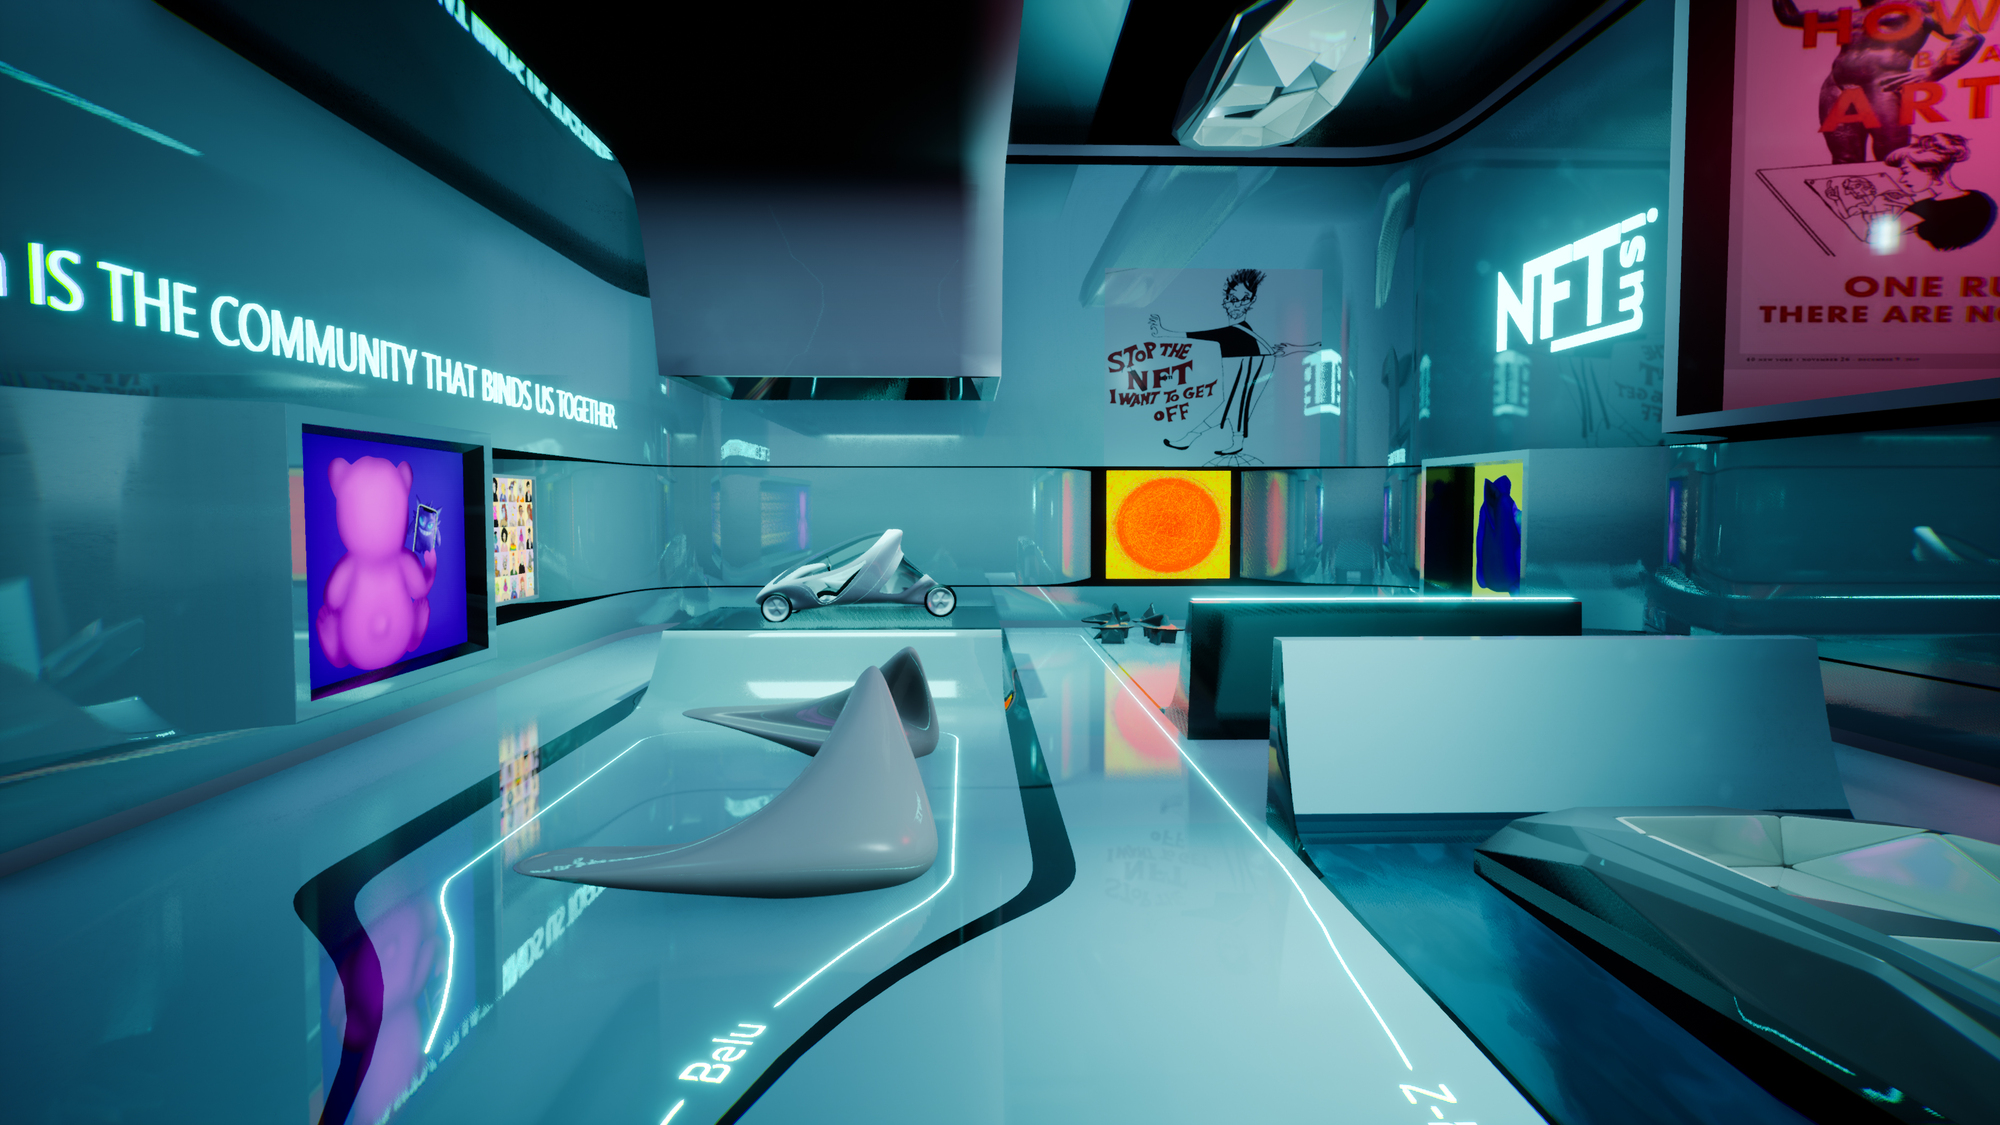 How Do I Create a Gallery in the Metaverse?